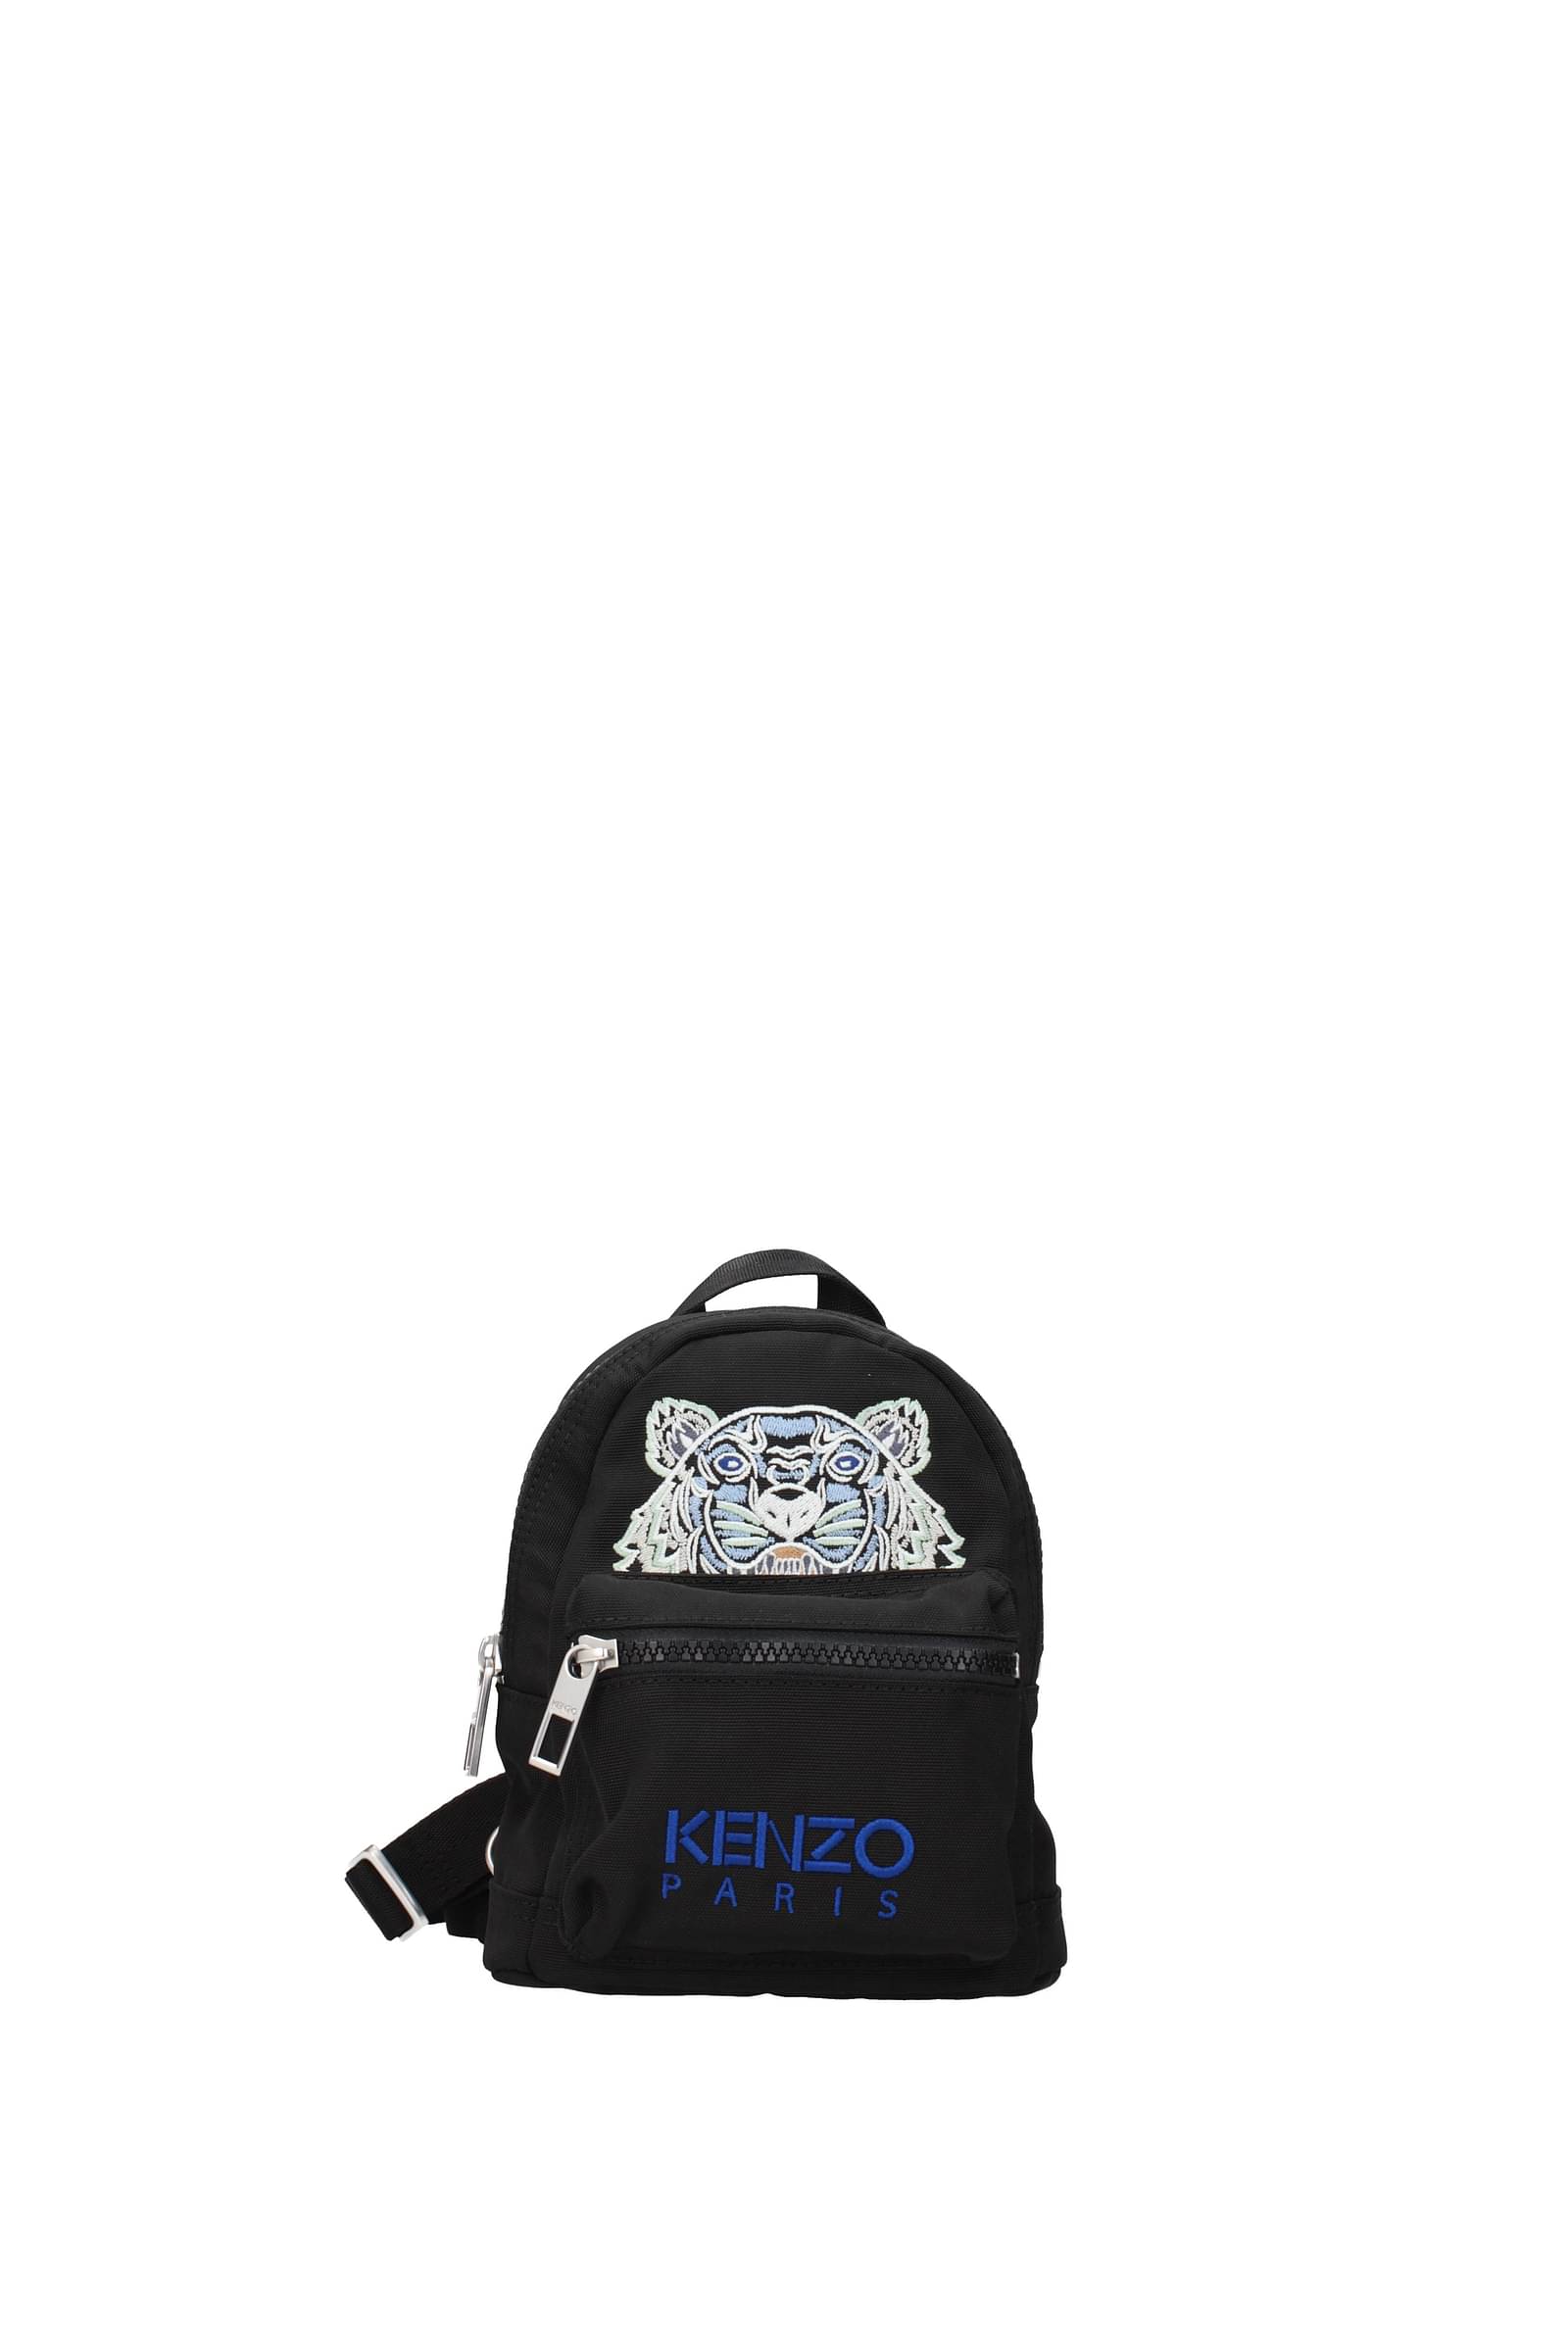 Kenzo Backpacks and bumbags Women 5SF301F2099H Fabric Black Blue 